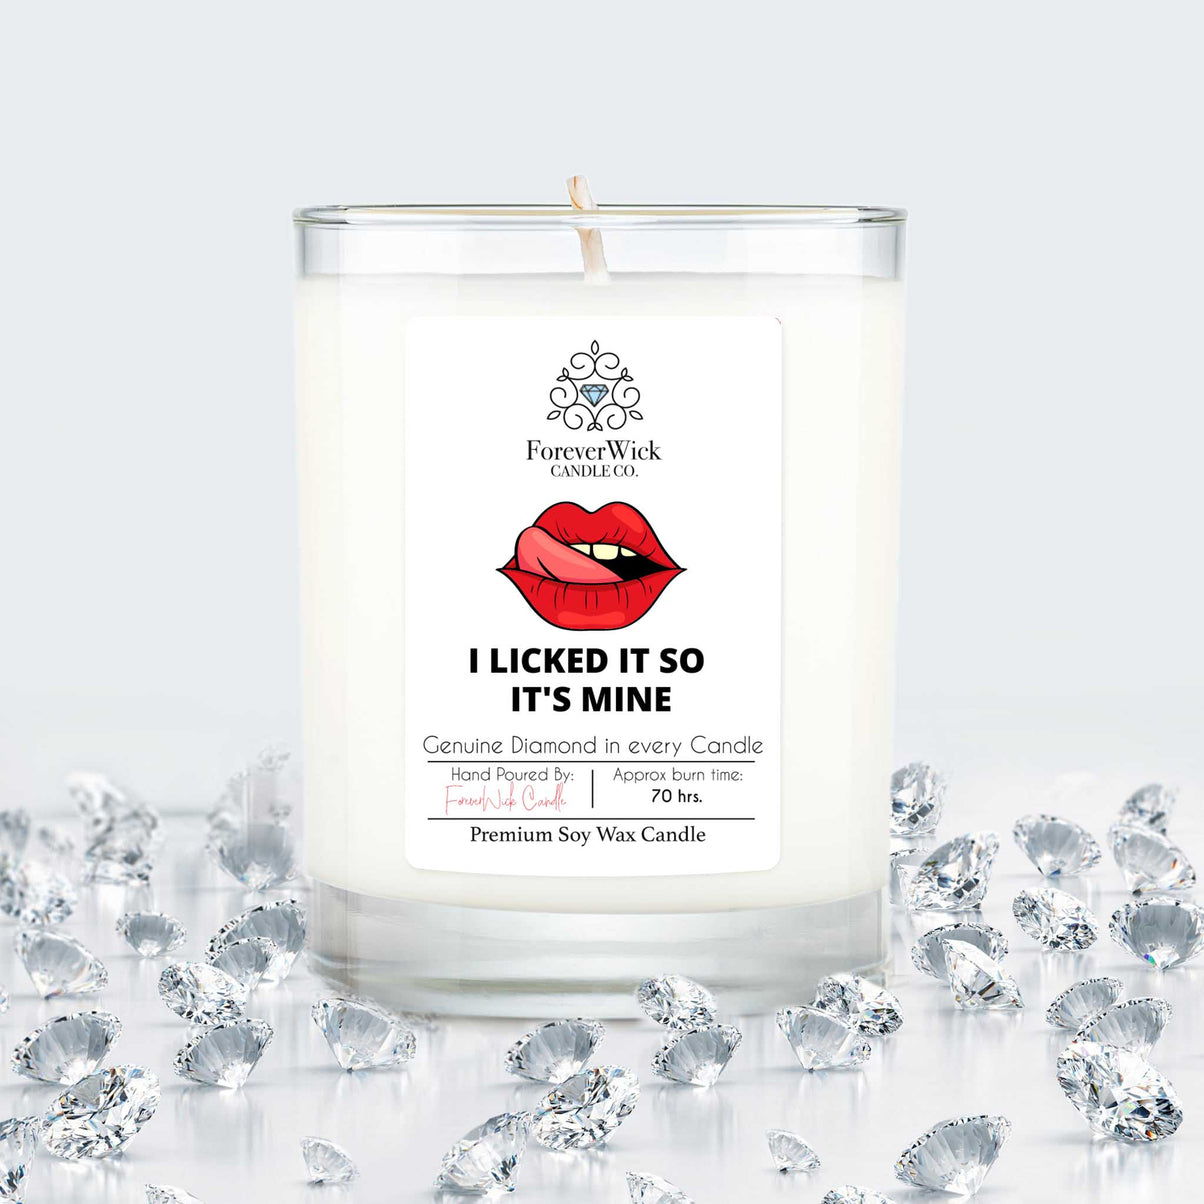 I Licked it so it's Mine Diamond Candle Deal